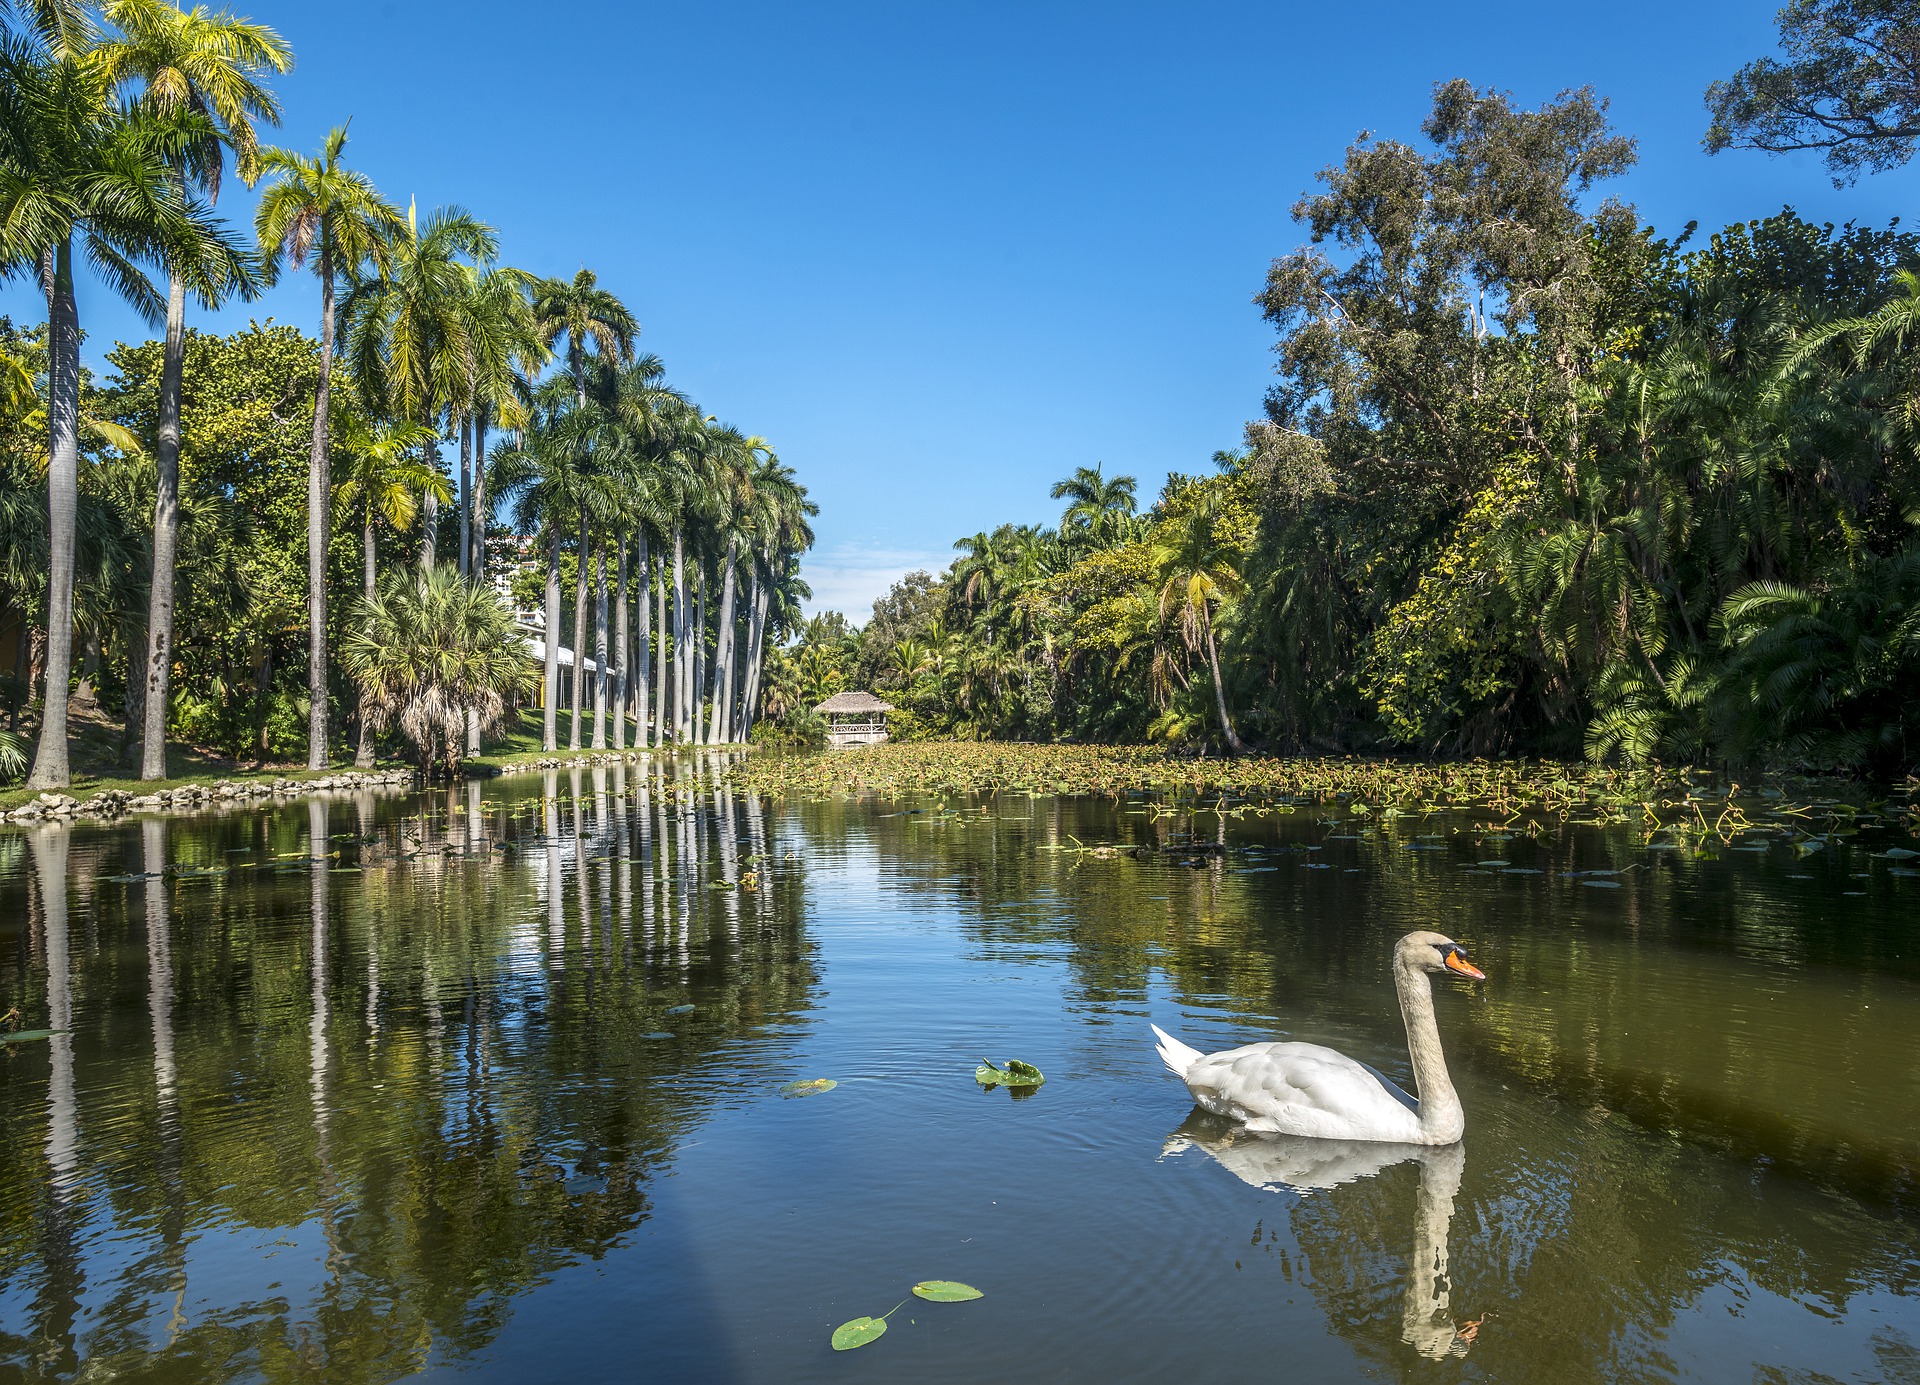 southern hospitality and warm temperatures, Swan swimming in a canal